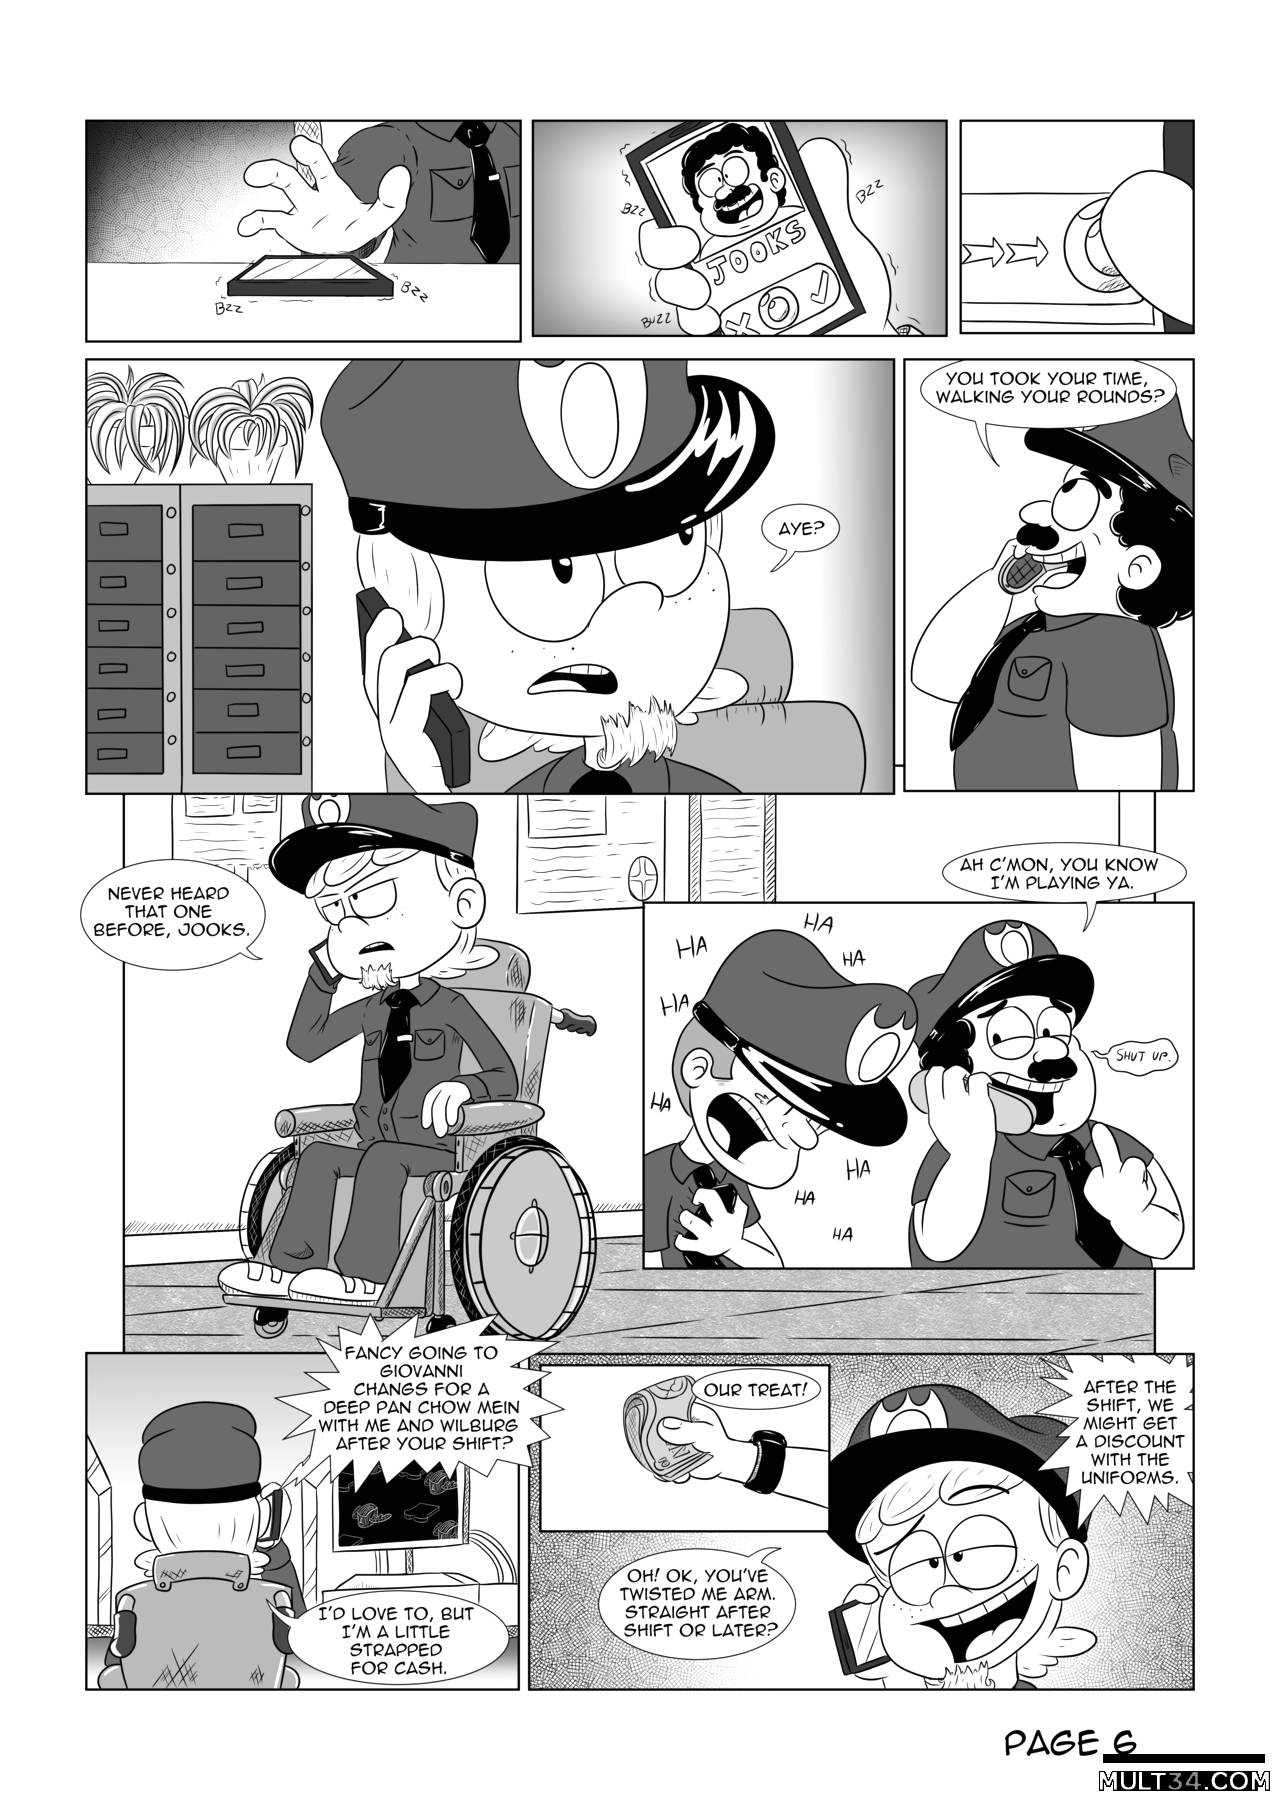 The loud house comic, chapter 3 page 7